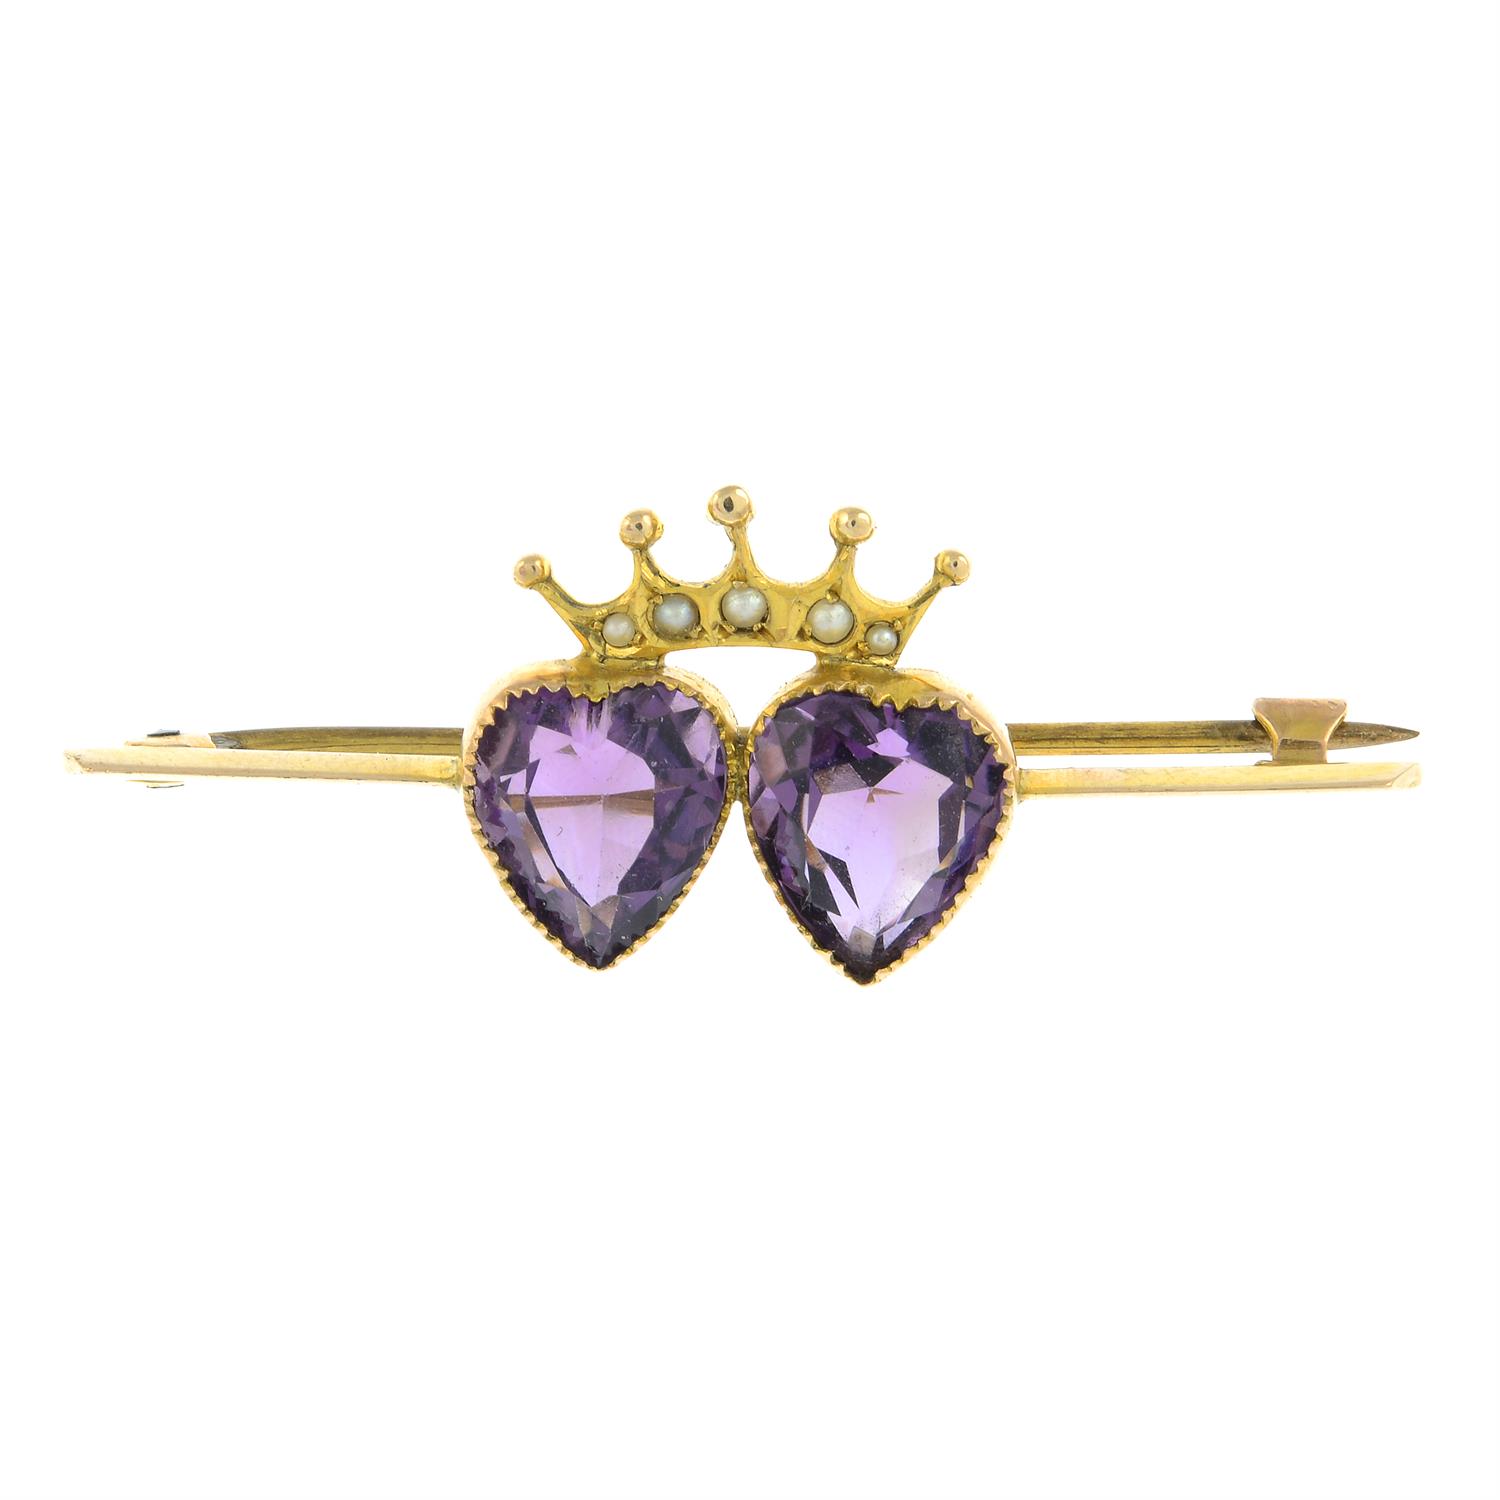 An early 20th century amethyst and seed pearl double heart and crown brooch.